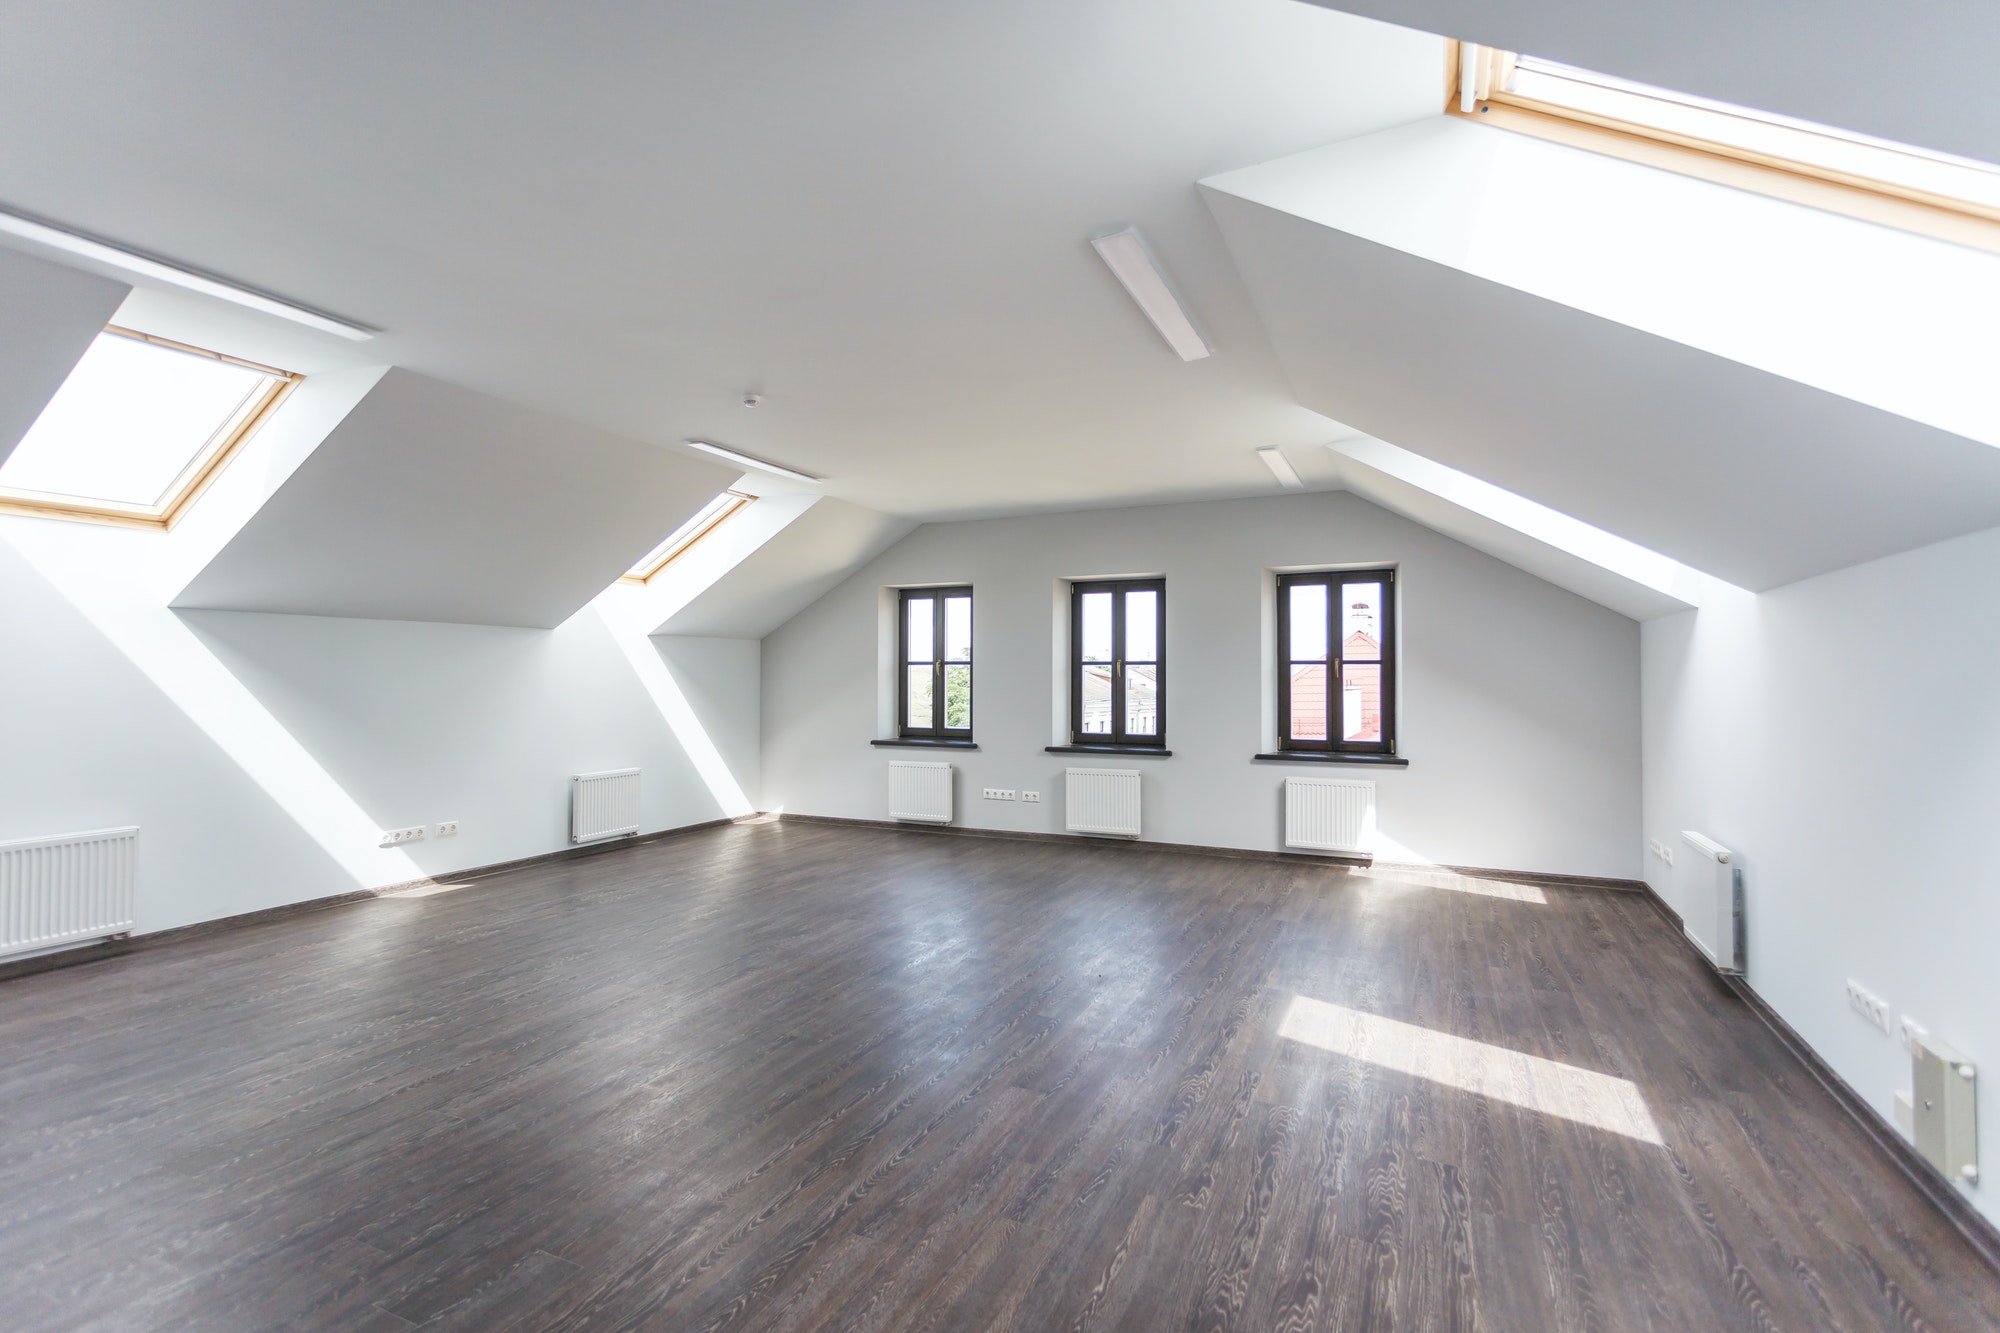 Side view of unfurnished room interior with wooden floor on roof floor, white walls